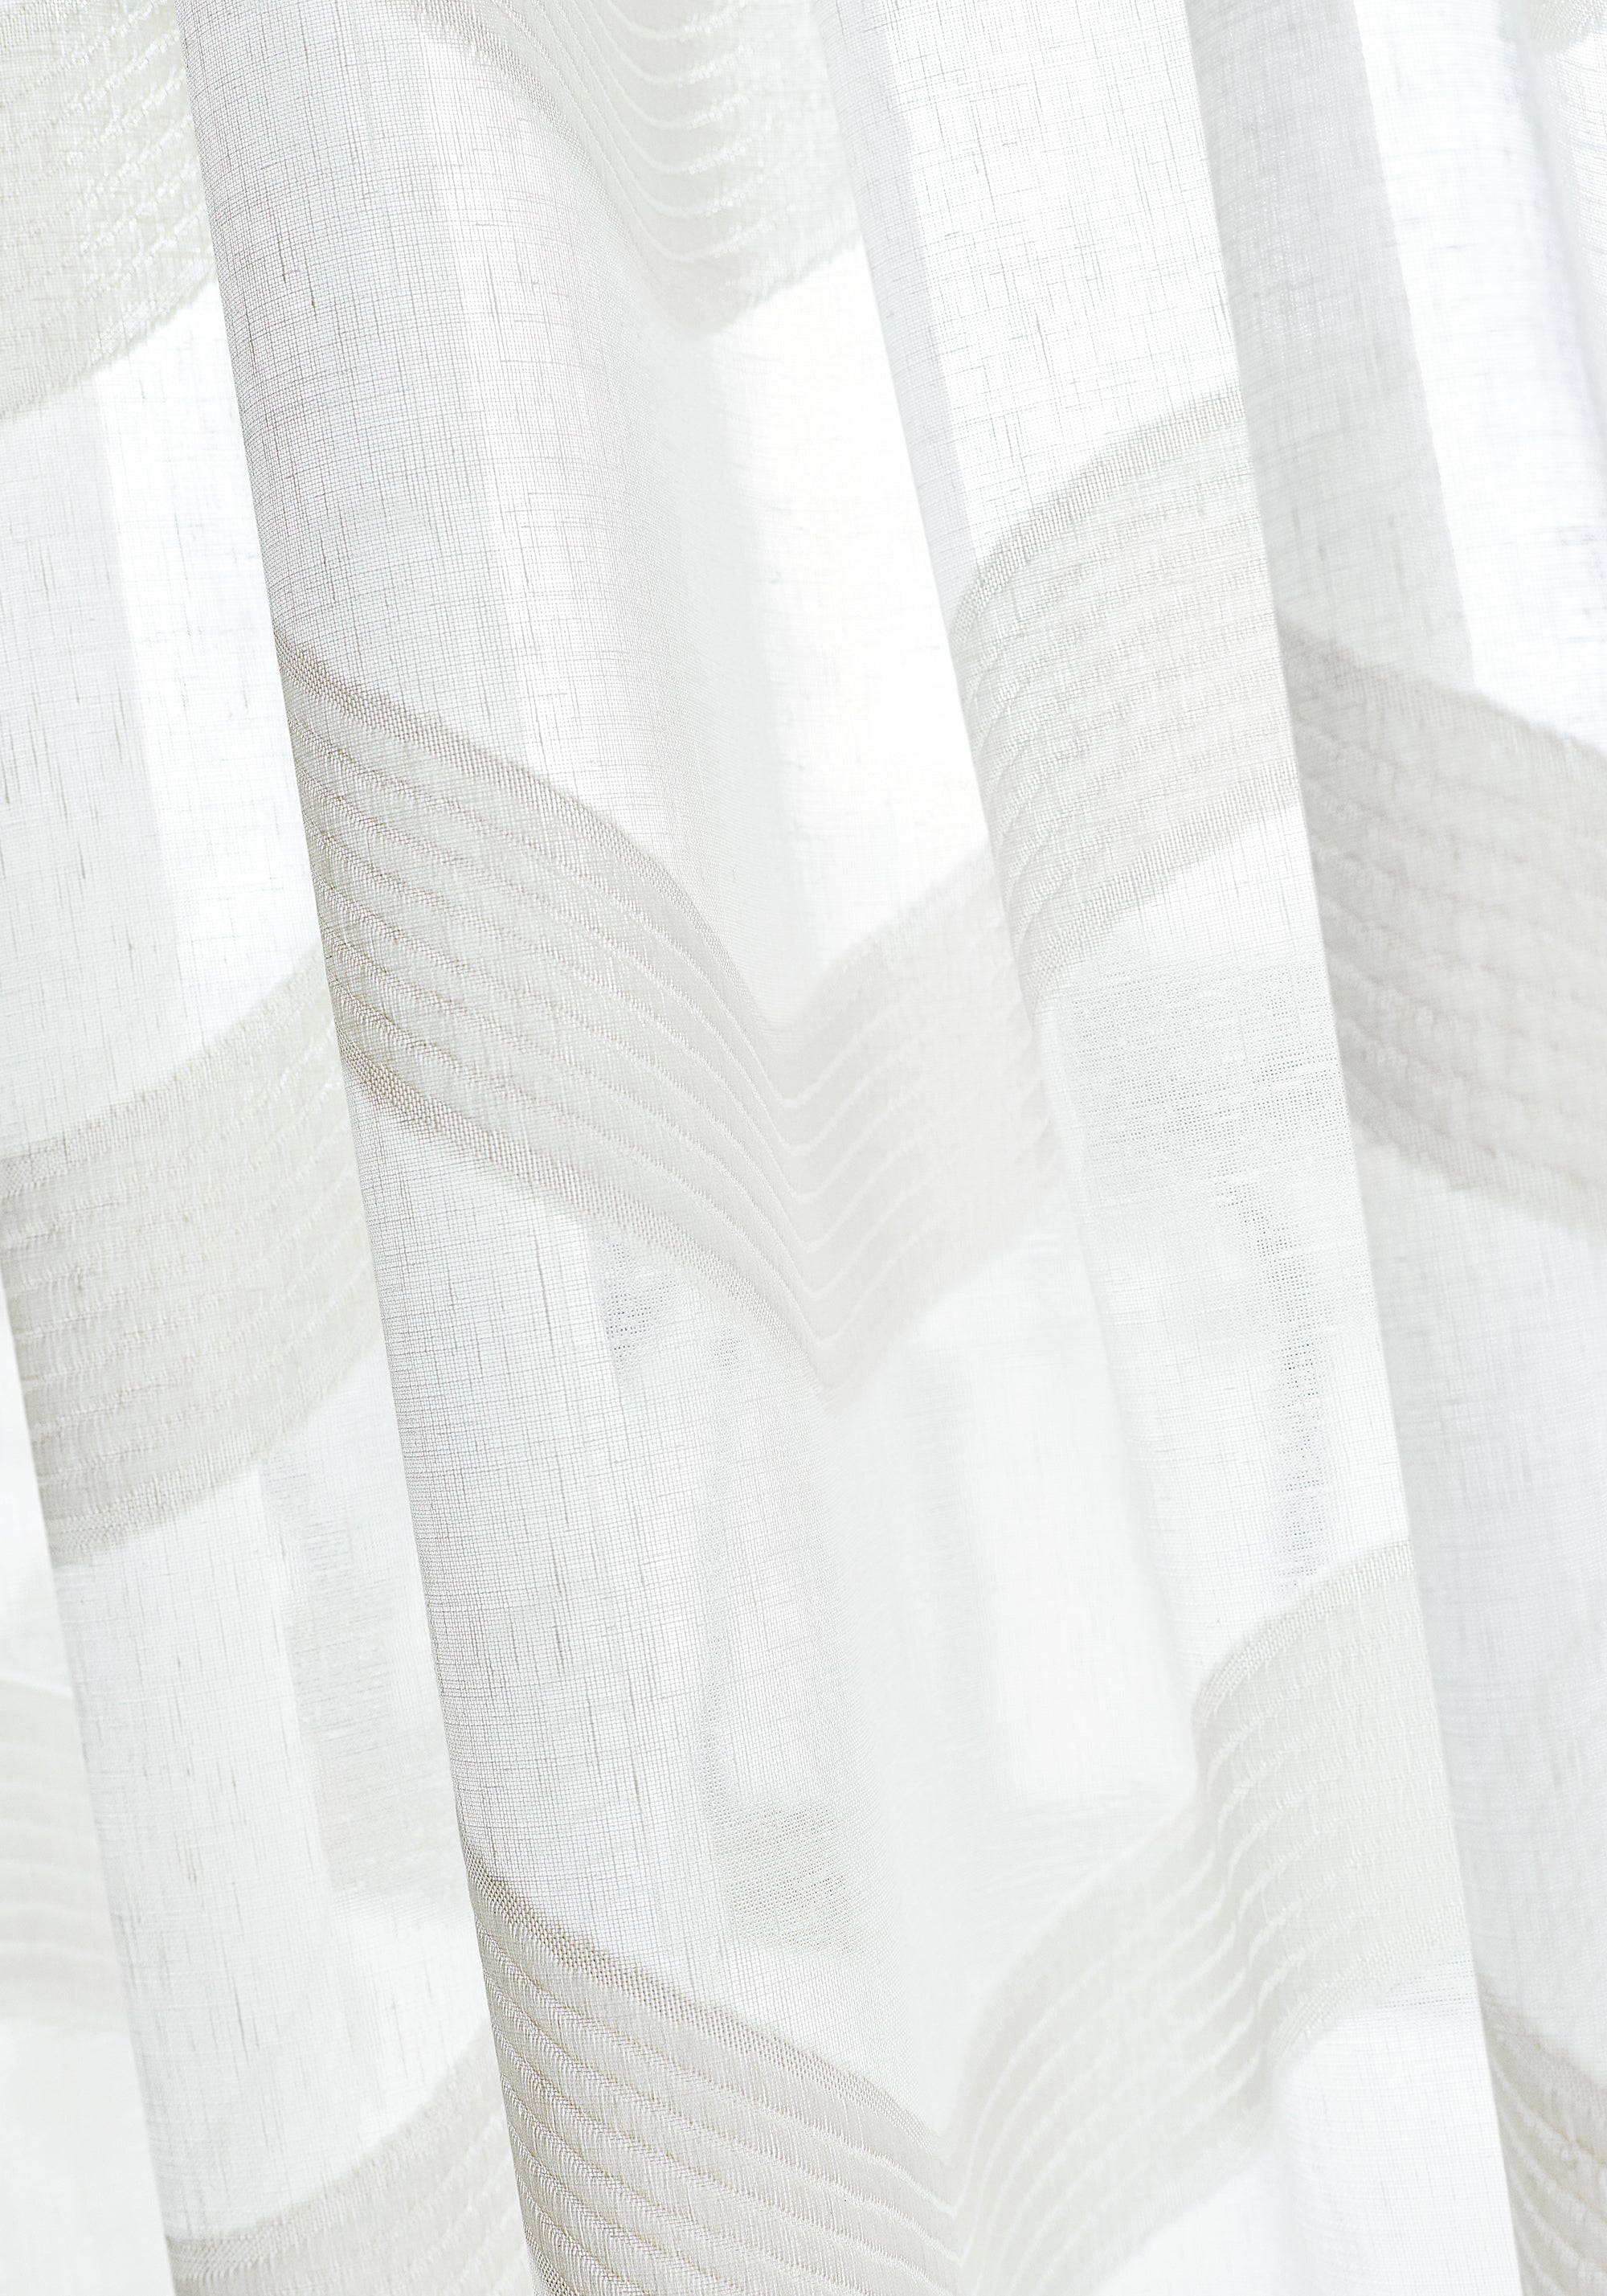 Closeup detail of Sheer curtains made with Thibaut Cassidy Sheer woven fabric in Snow White color pattern FWW7147